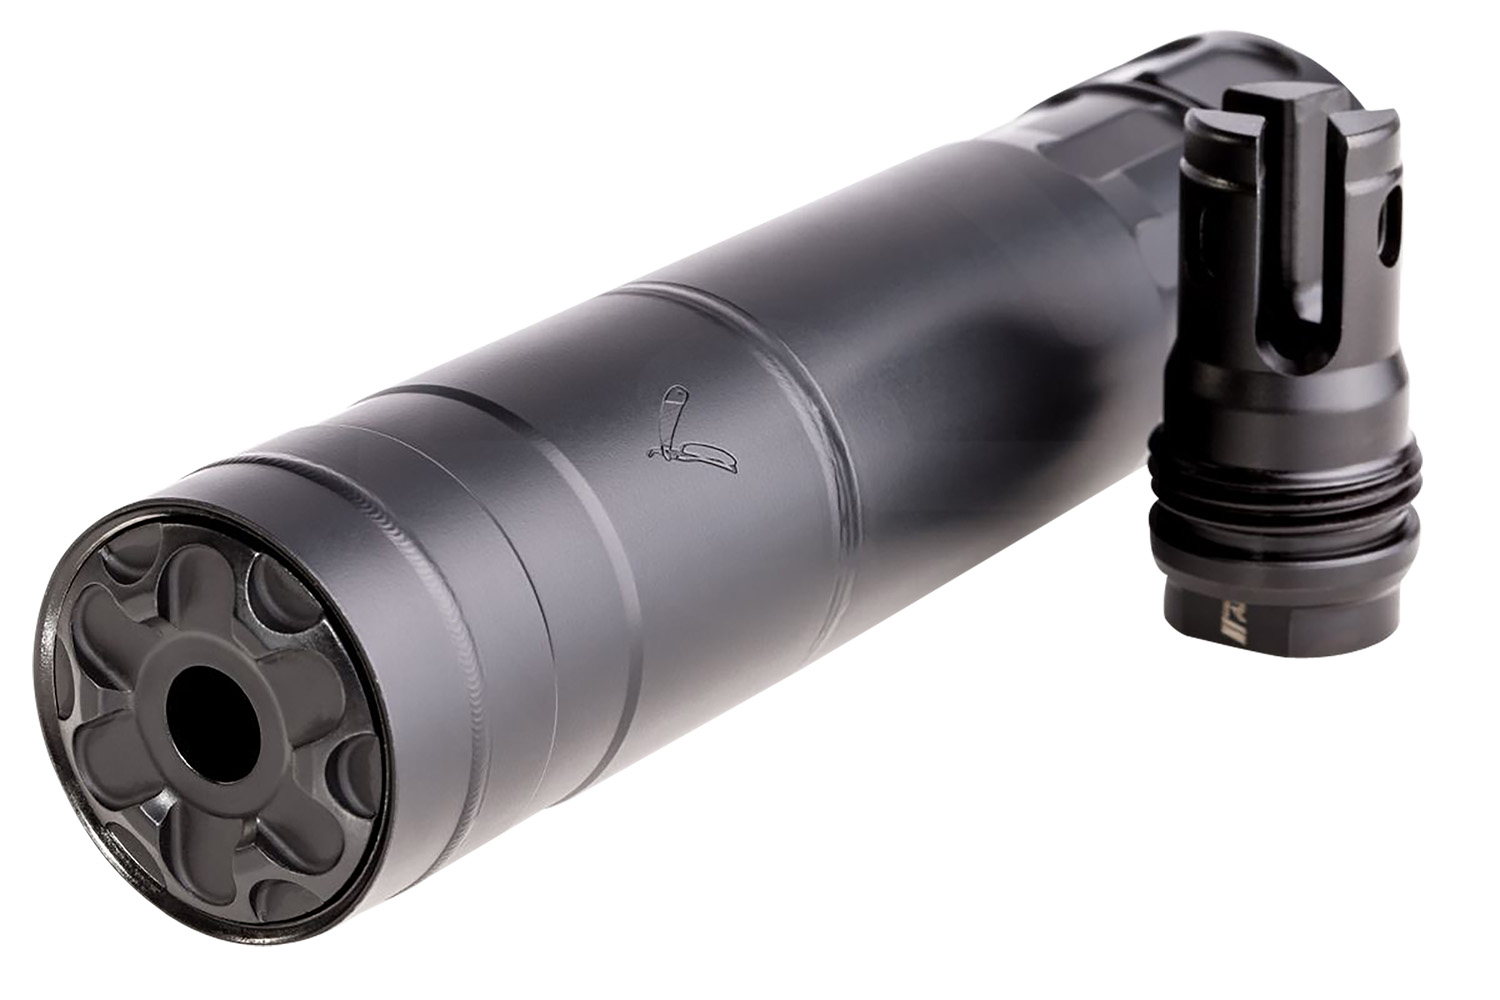 Rugged Suppressors RZR762TI Razor762 TI 30 Cal (7.62mm), Rated Up To 300 RUM, 6.40